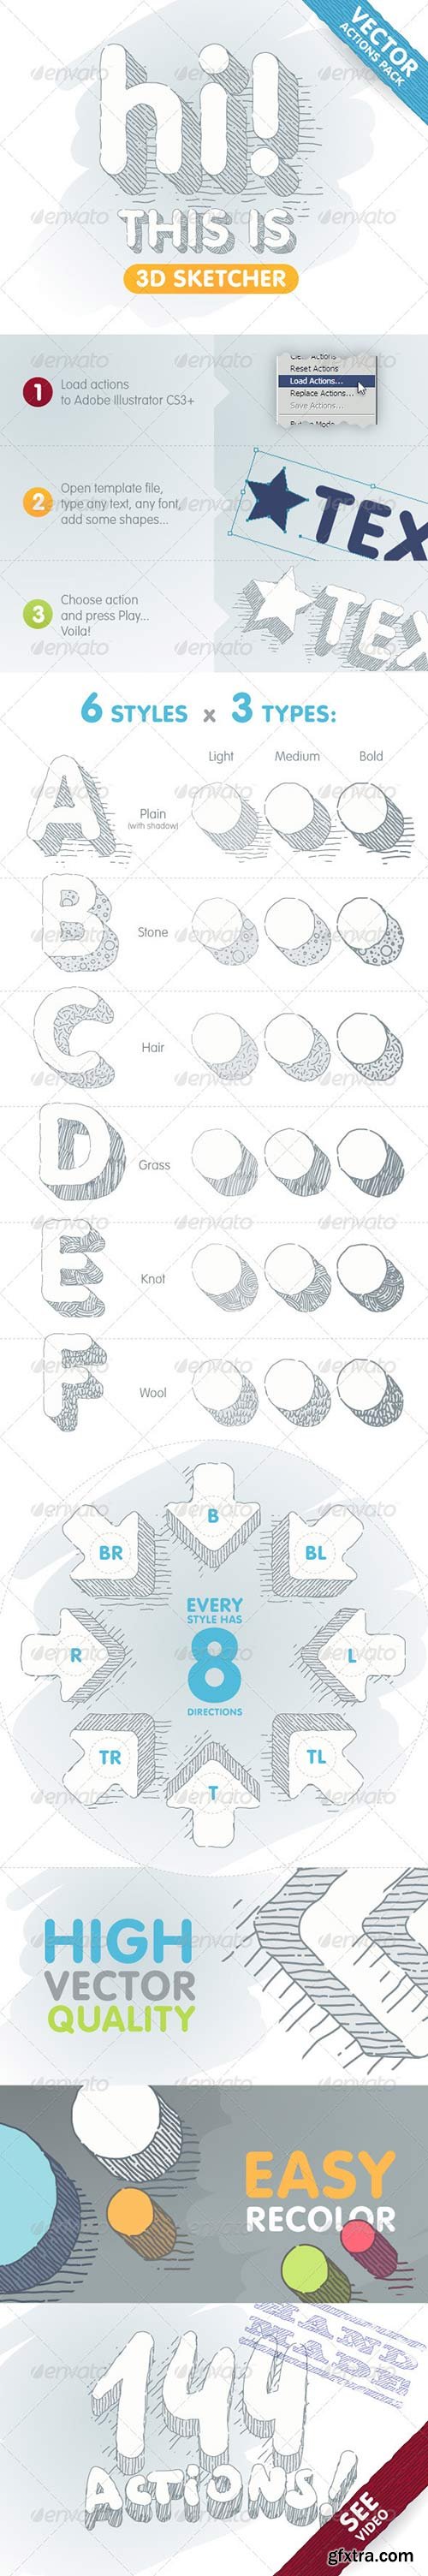 GraphicRiver - 3D Sketcher - Vector Actions Pack